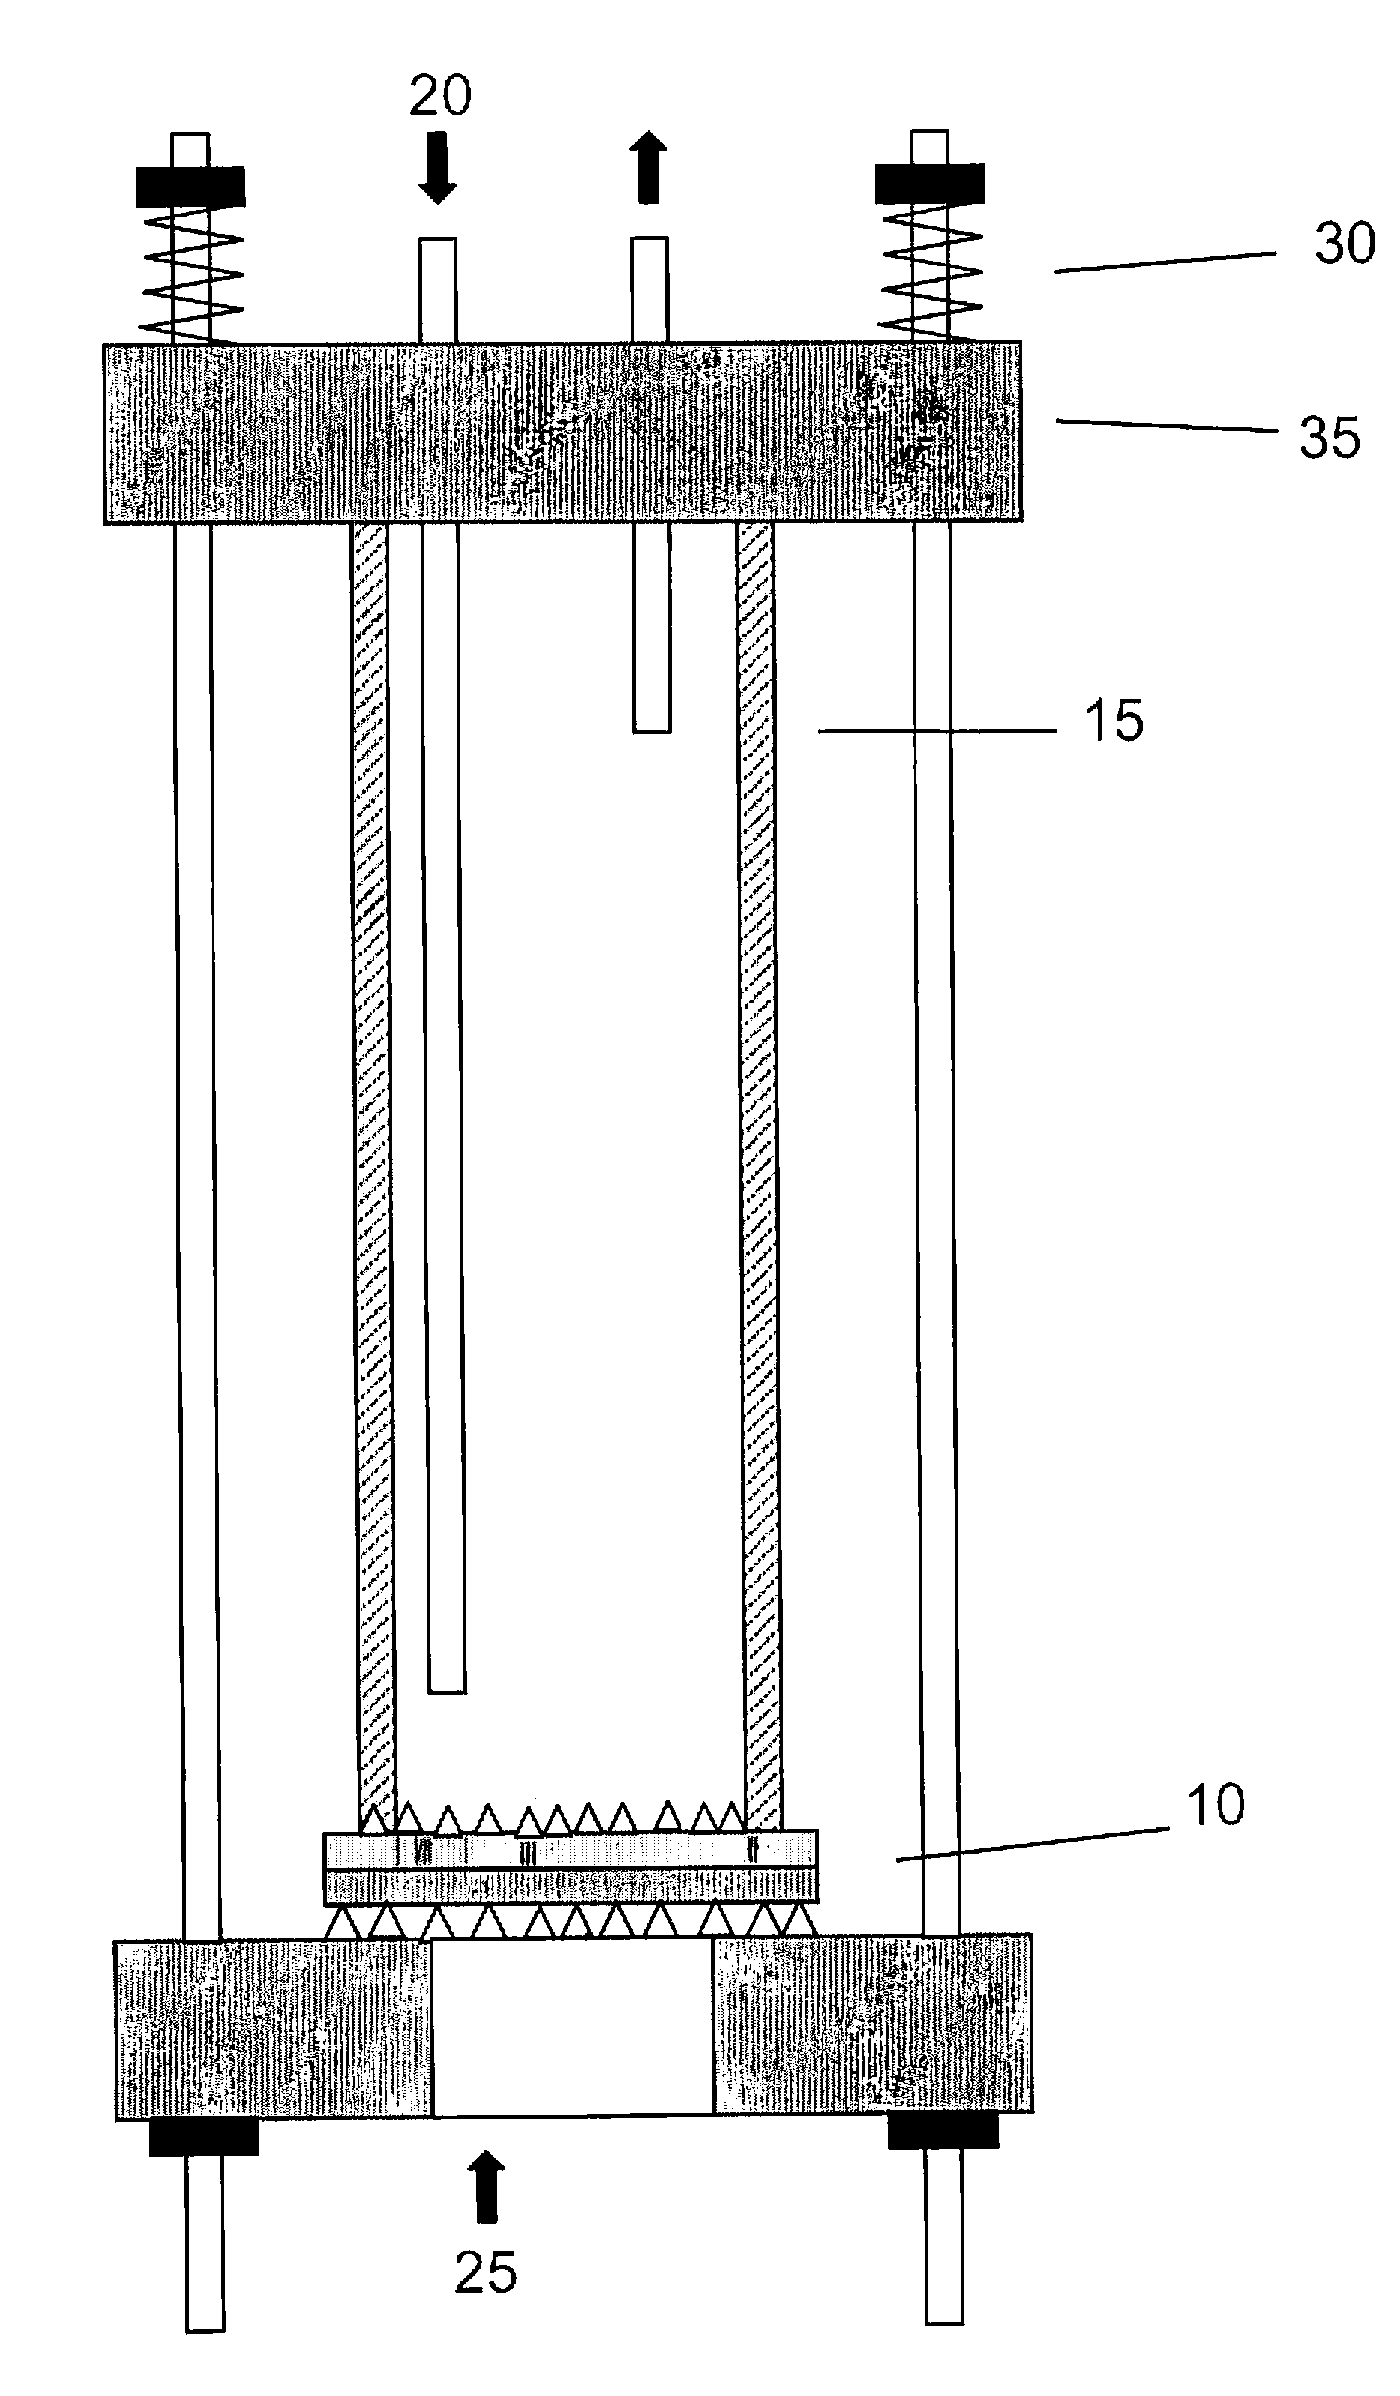 Solid oxide fuel cell cathode comprising lanthanum nickelate